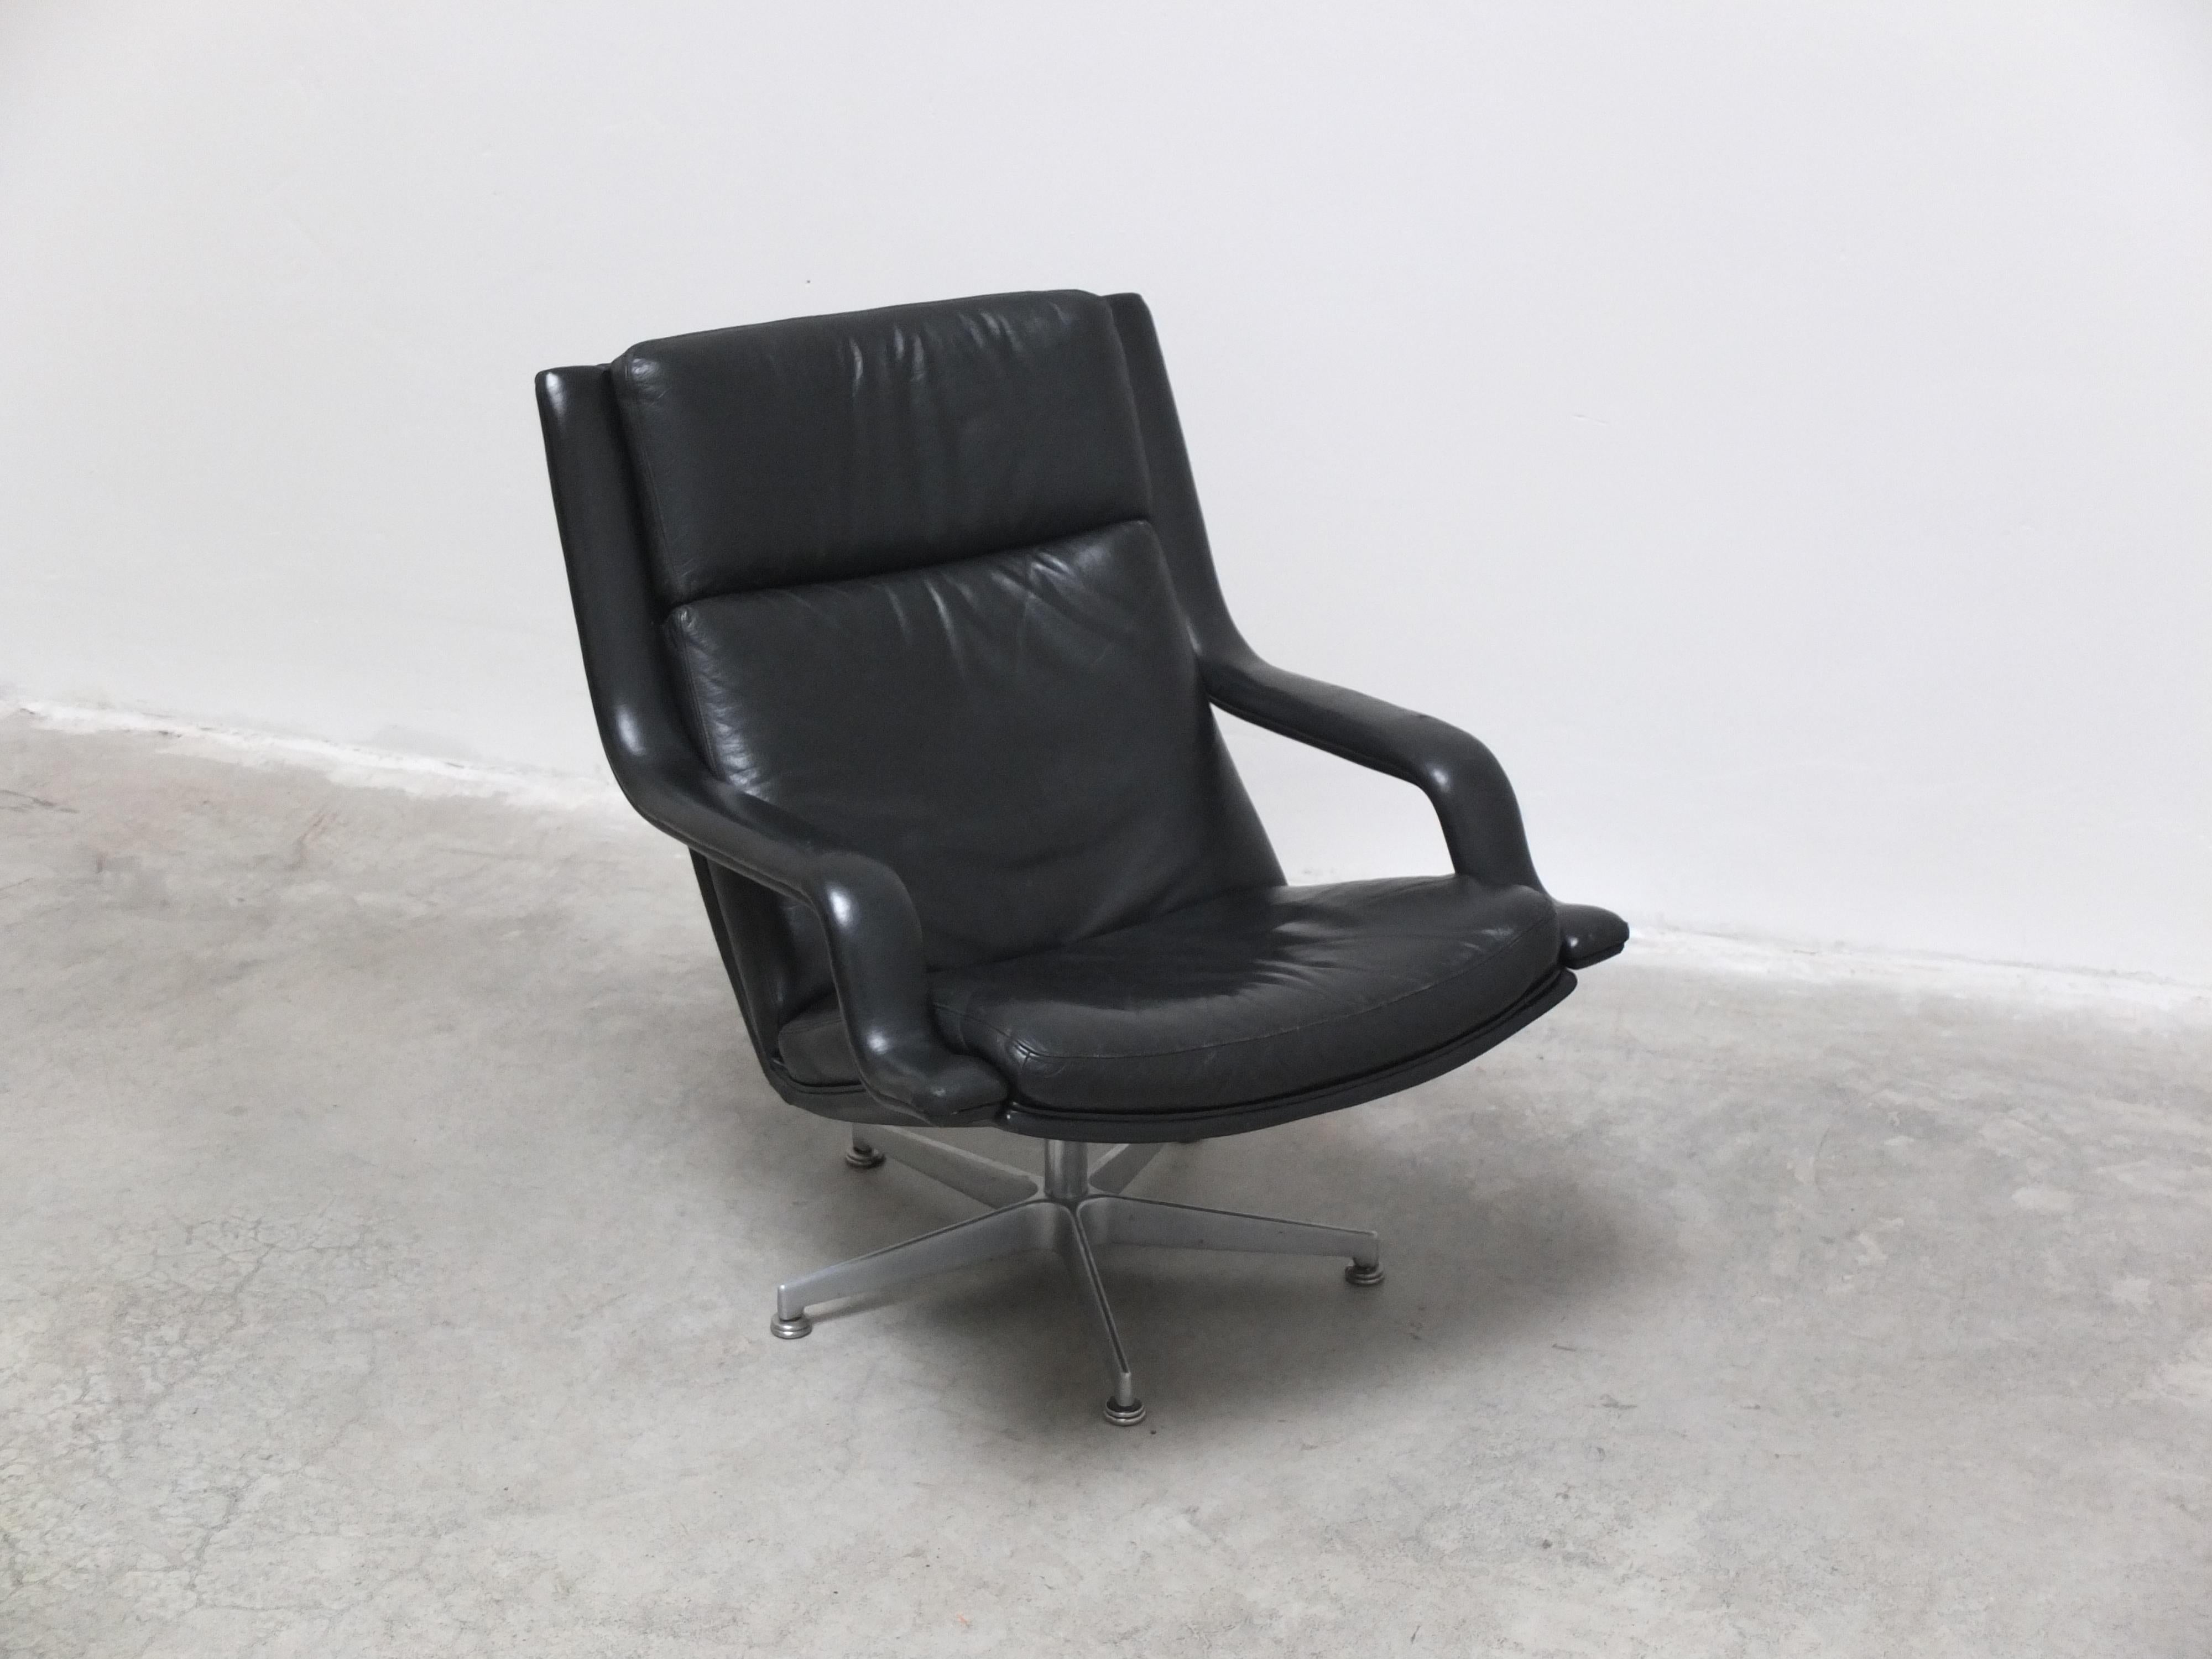 Leather 'F152' Swivel Lounge Chairs by Geoffrey Harcourt for Artifort, 1970s For Sale 1